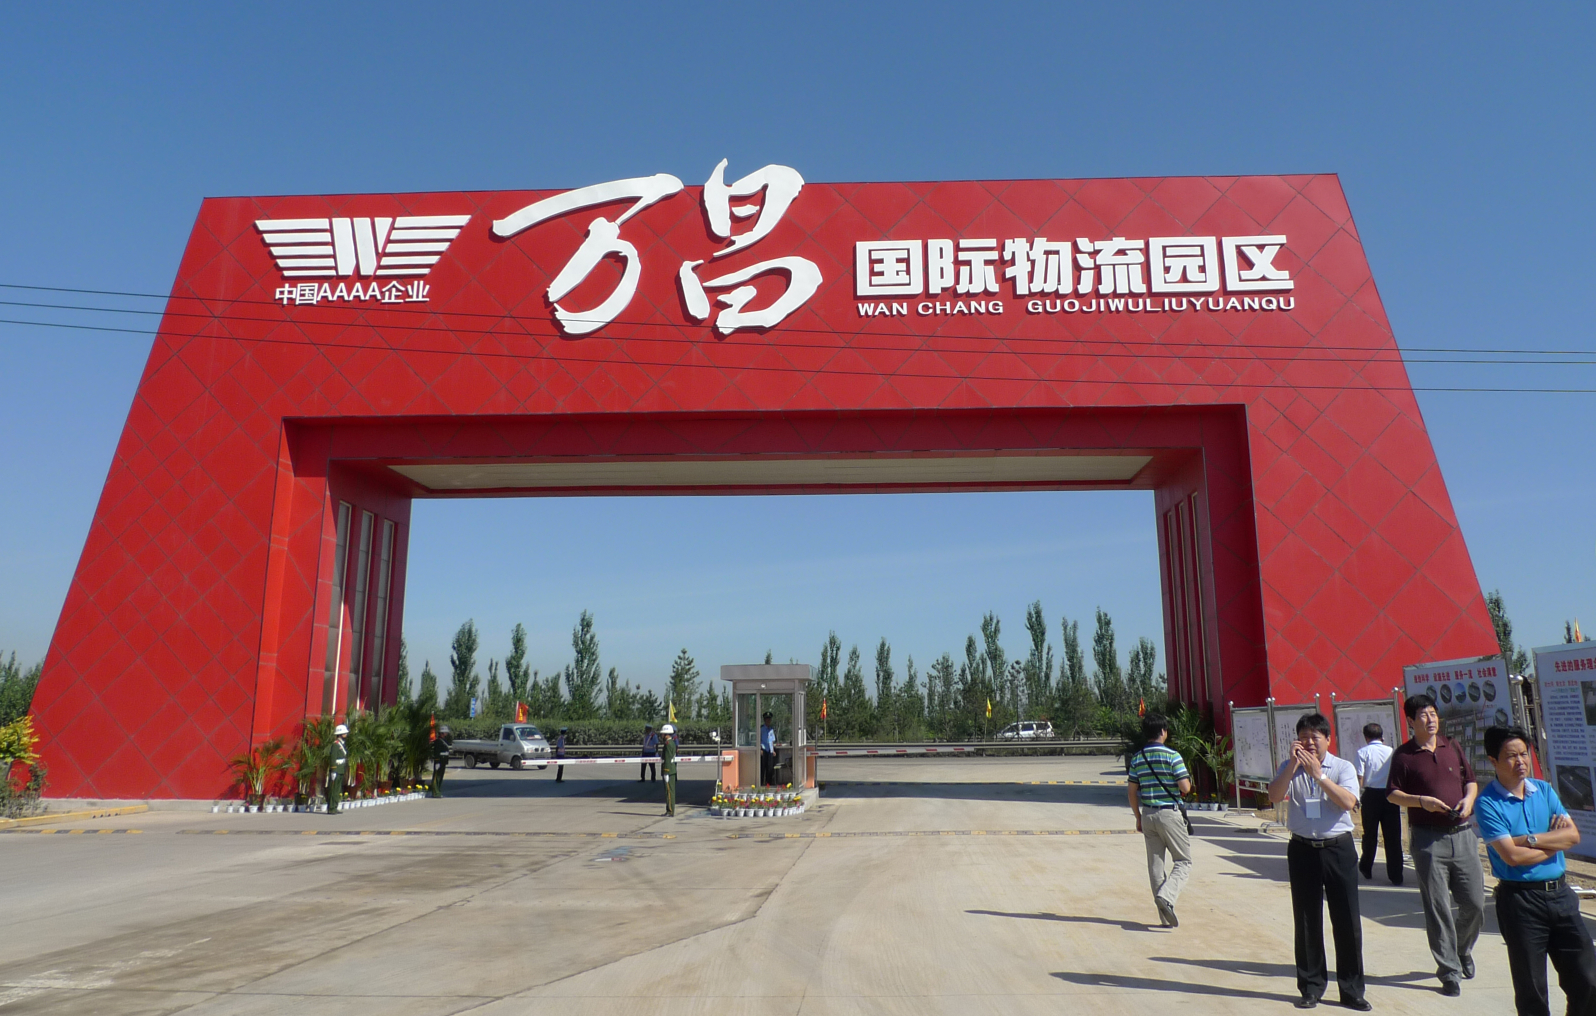 The entrance of a logistics park in Datong, Shanxi province. Shenzhen International is investing a billion yuan to develop a logistics park in Nanchang and has six other logistic projects in six other mainland cities under development. Photo: Victoria Ruan